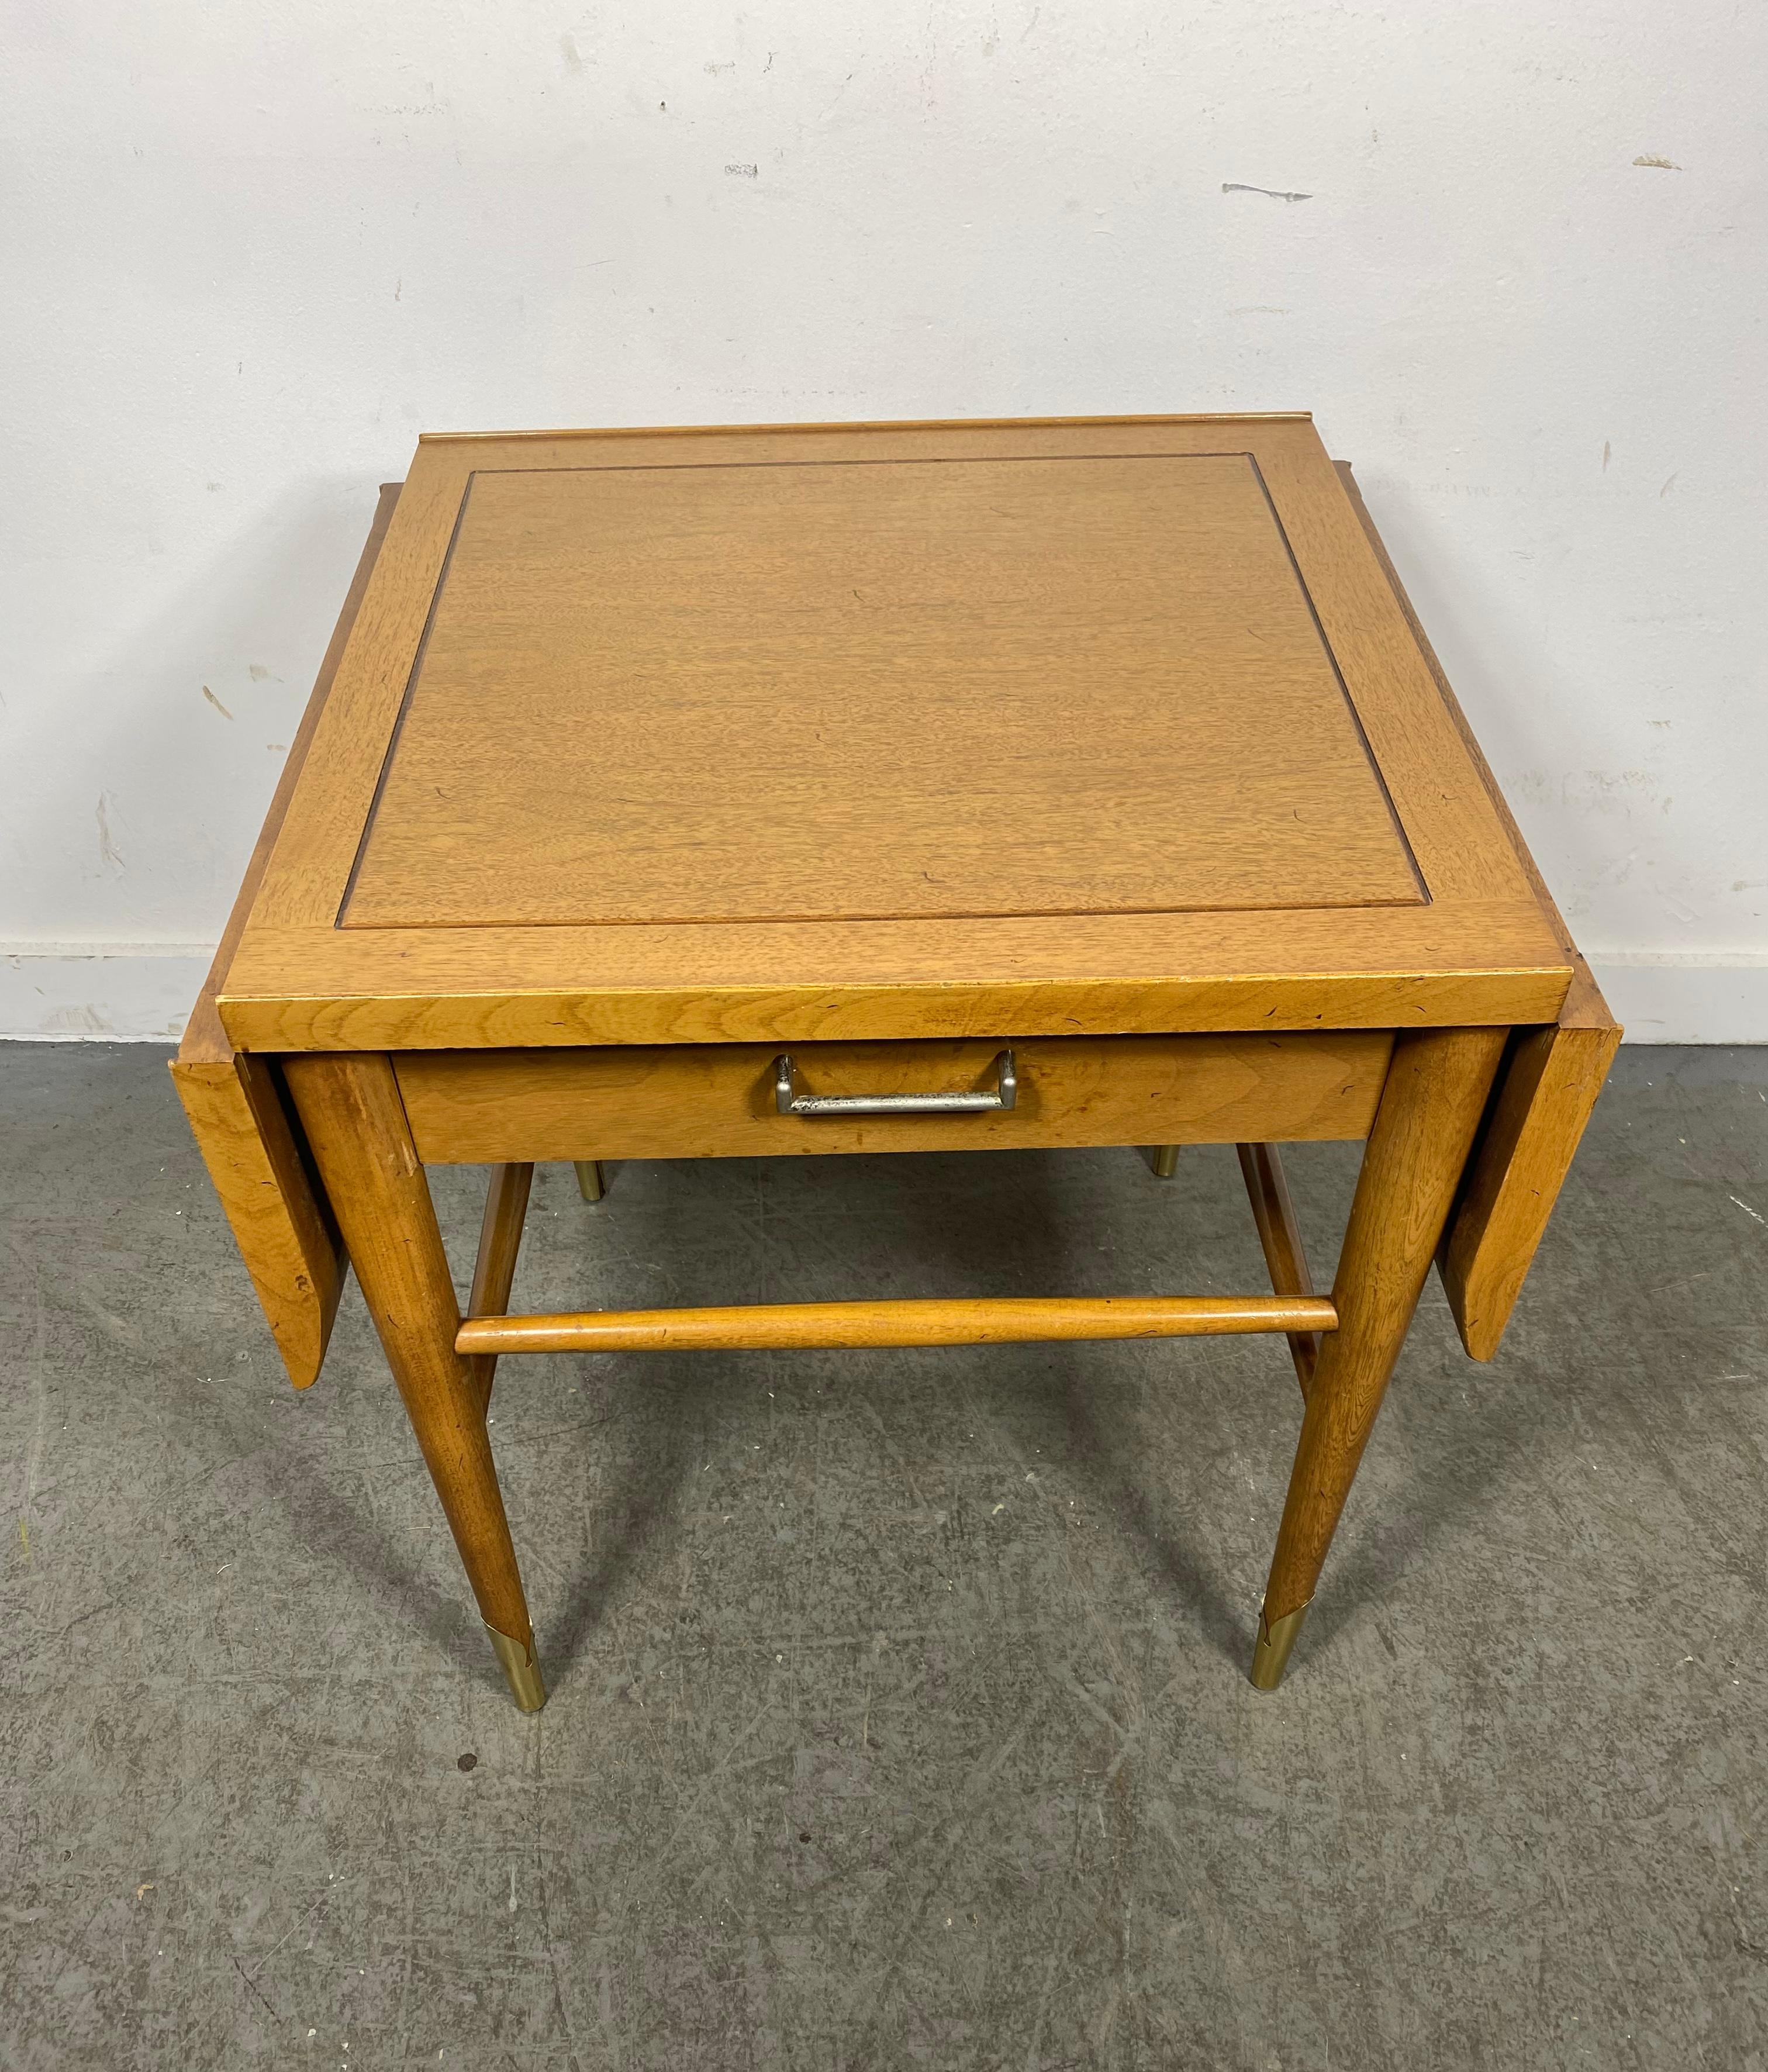 Classic Mid Century Modern Lamp/end Table, Copenhagen collection by Lane In Good Condition For Sale In Buffalo, NY